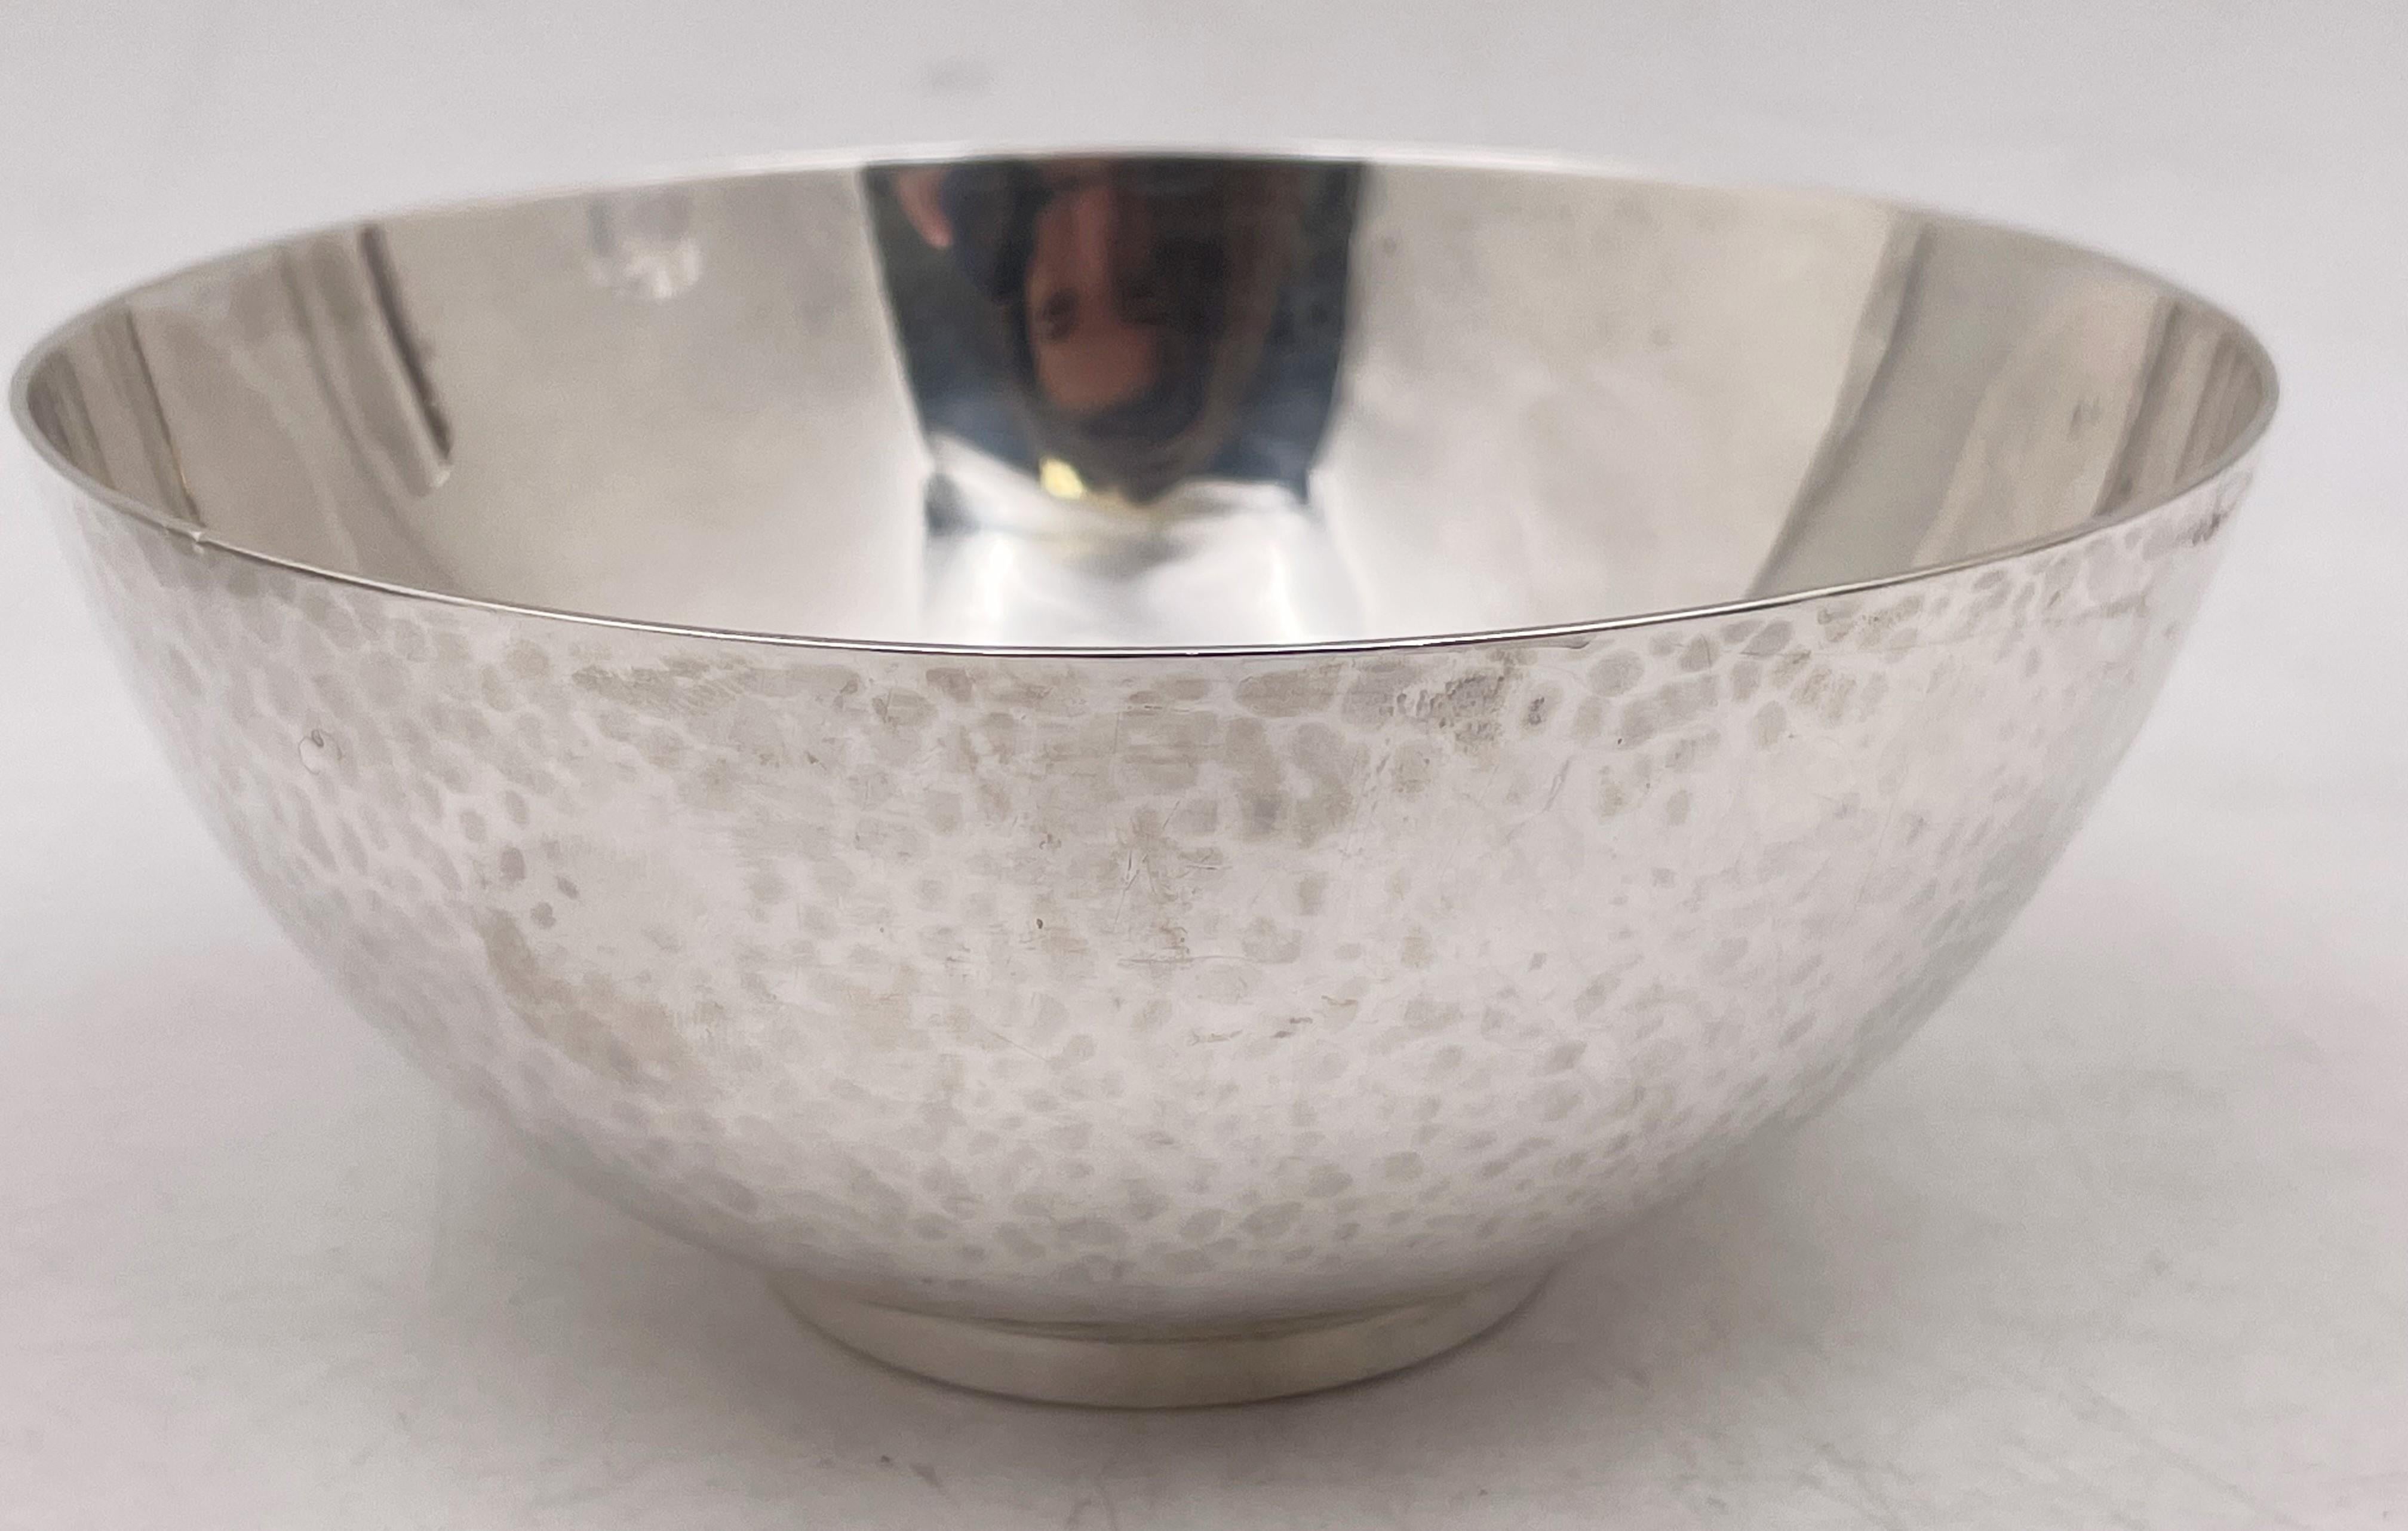 Georg Jensen hand-hammered sterling silver bowl in pattern number 580, made between 1925 and 1932, measuring 4 7/8’’ diameter by 2 1/8’’ in height, weighing 6.9 troy ounces, and bearing hallmarks and a monogram as shown. 

Danish silversmith Georg